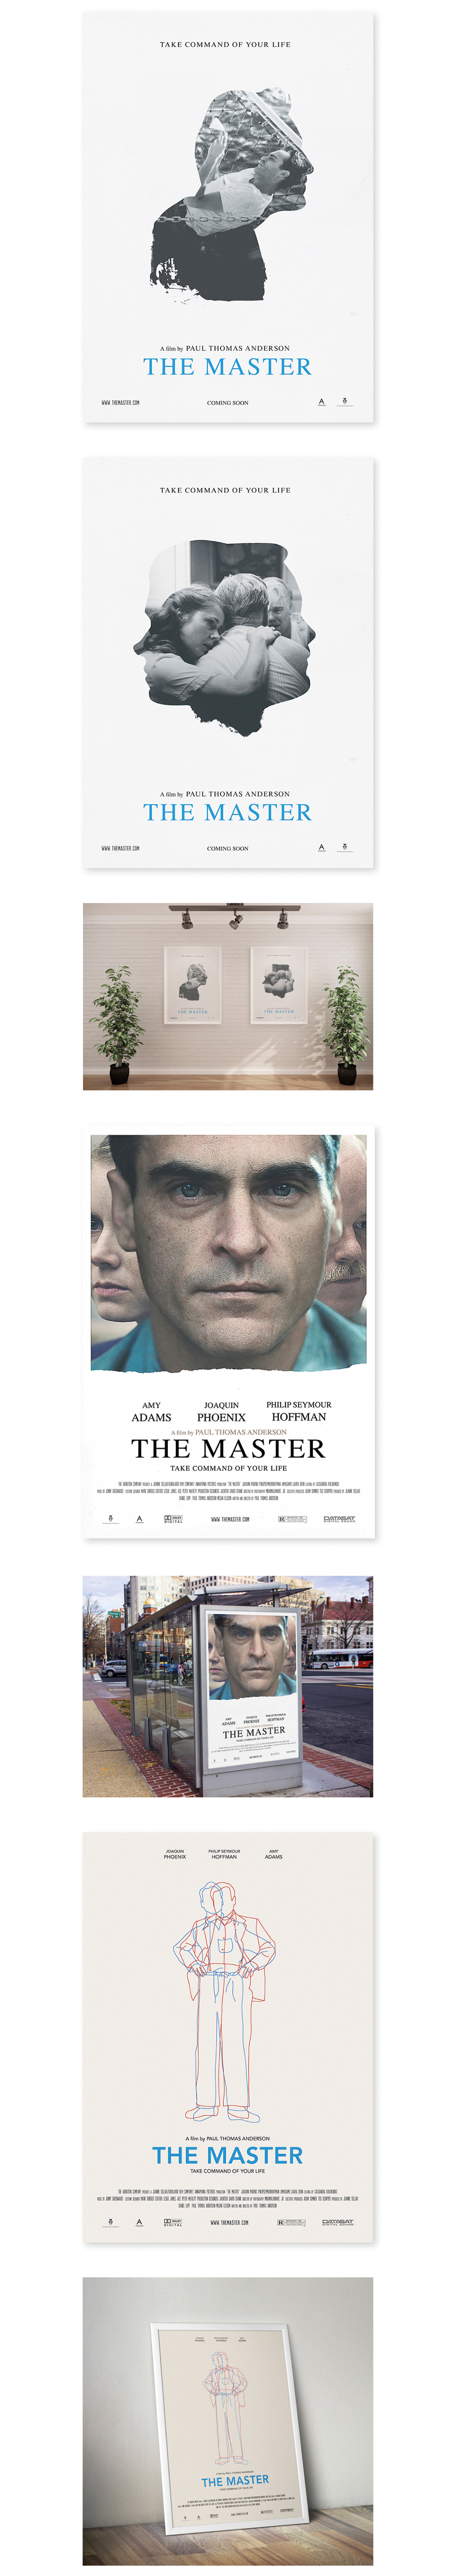 The Master Paul Thomas Anderson joaquin phoenix alternative movie poster film poster movie poster poster teaser